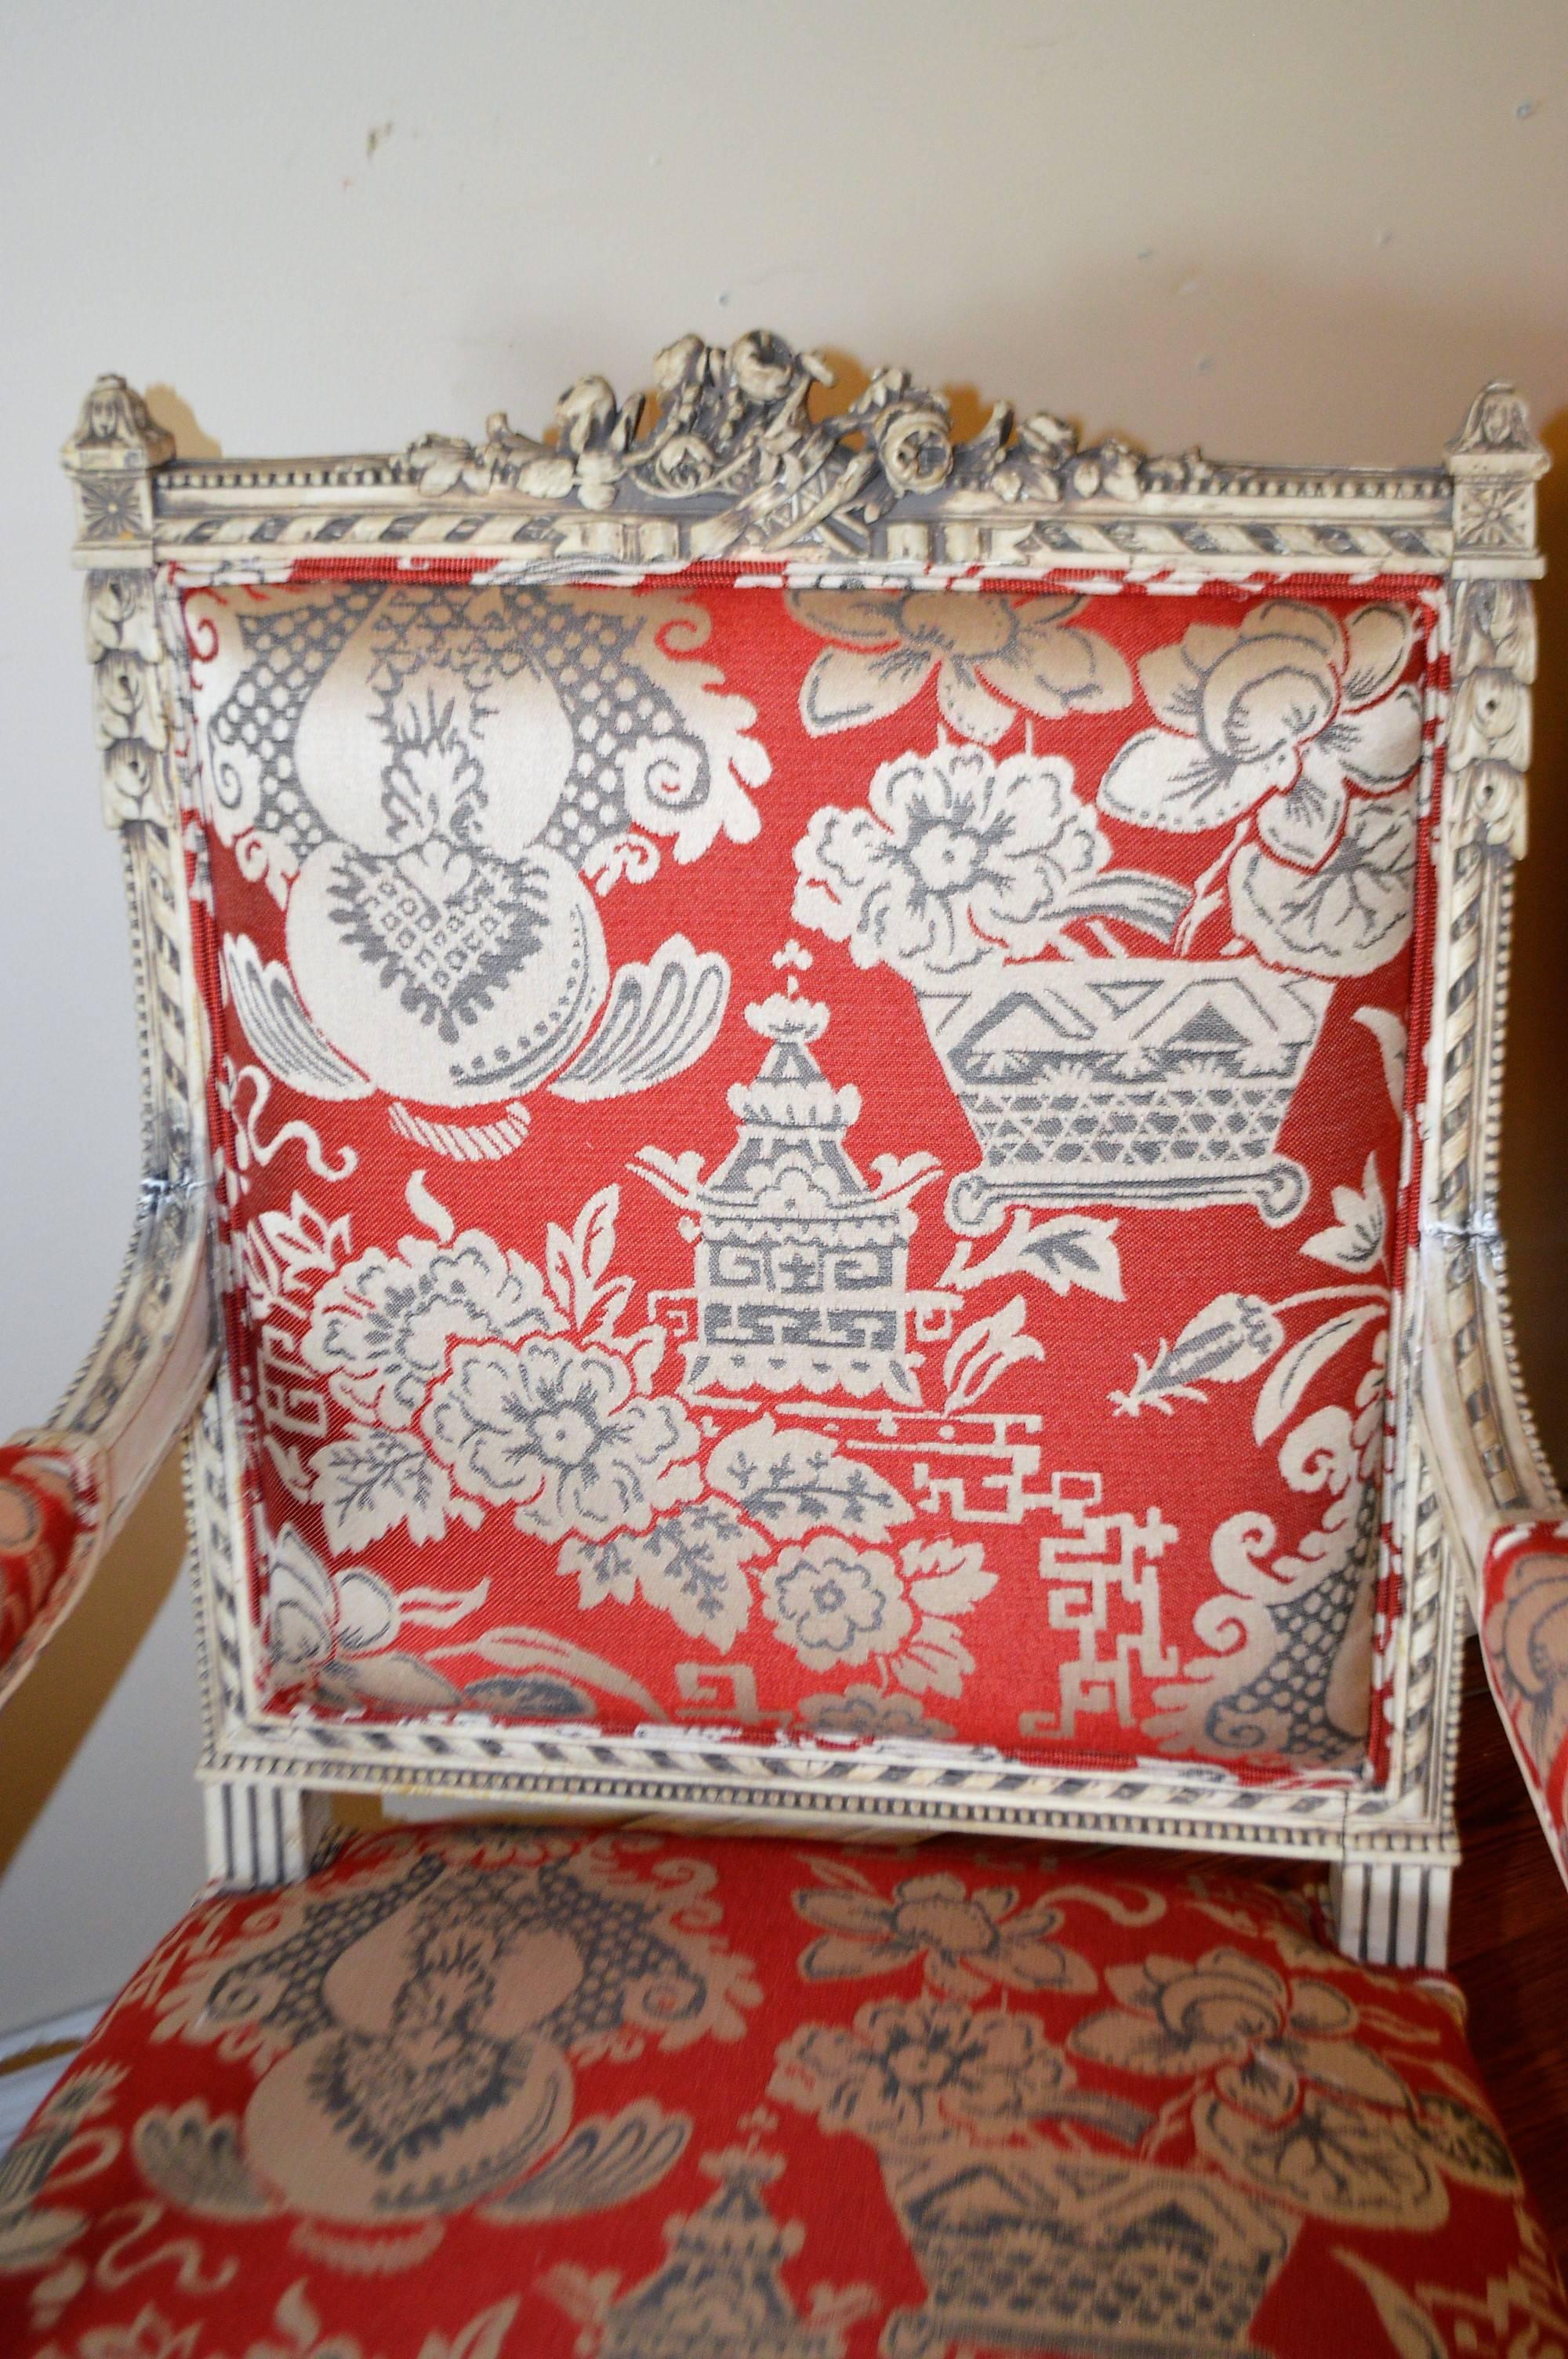 Amazing hand-carving details on these 19th century painted armchairs.
The frame painted finish has been kept original but the upholstery is newly done using a fine weave fabric with a chinoiserie pattern.
The fabric background color is red